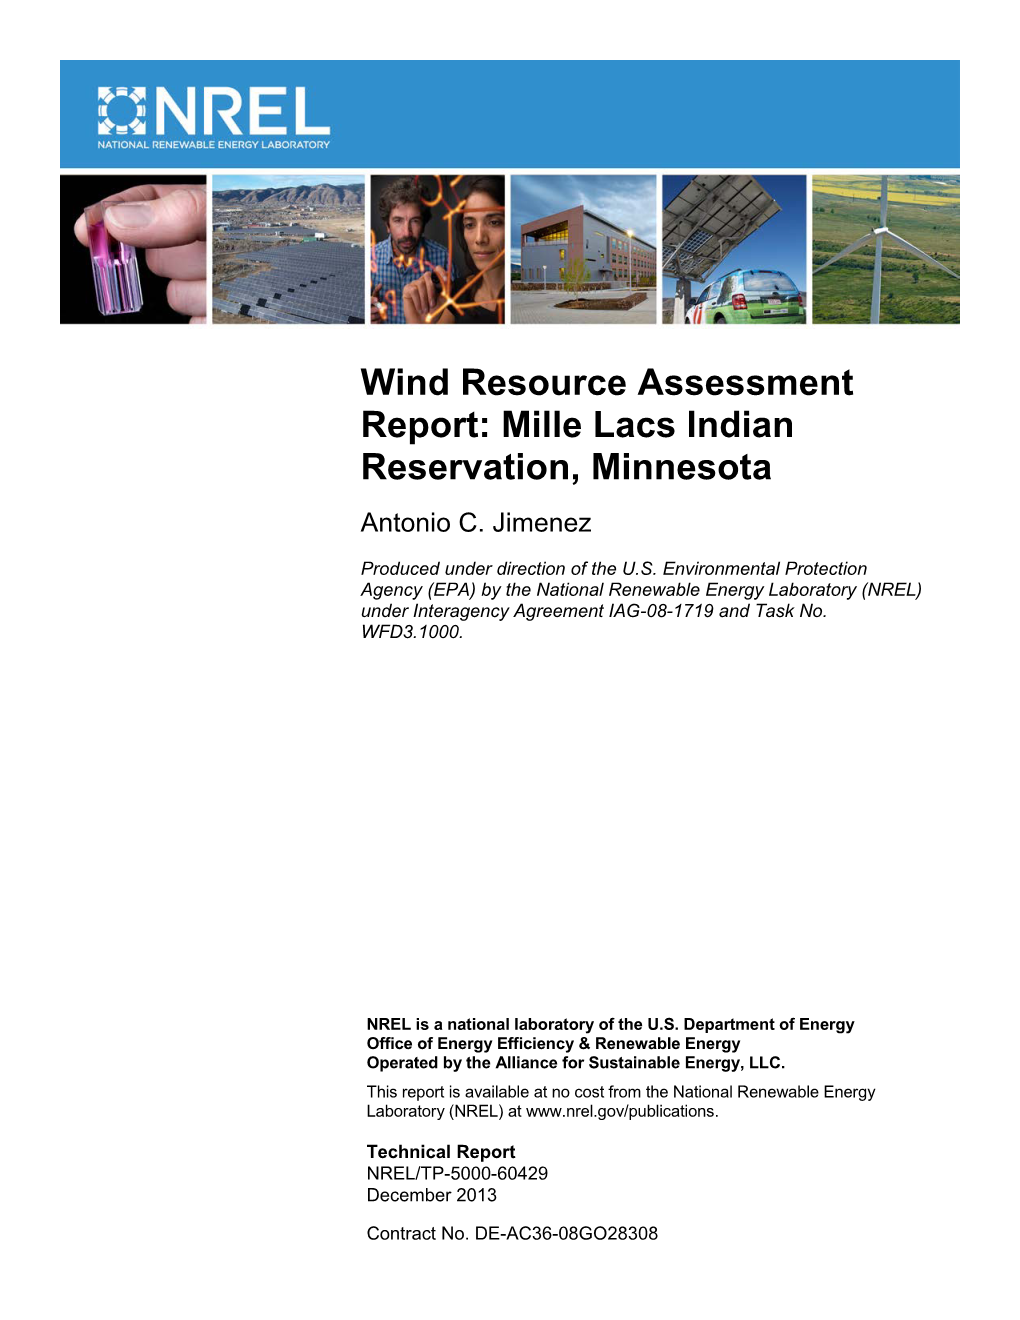 Wind Resource Assessment Report: Mille Lacs Indian Reservation, Minnesota Antonio C